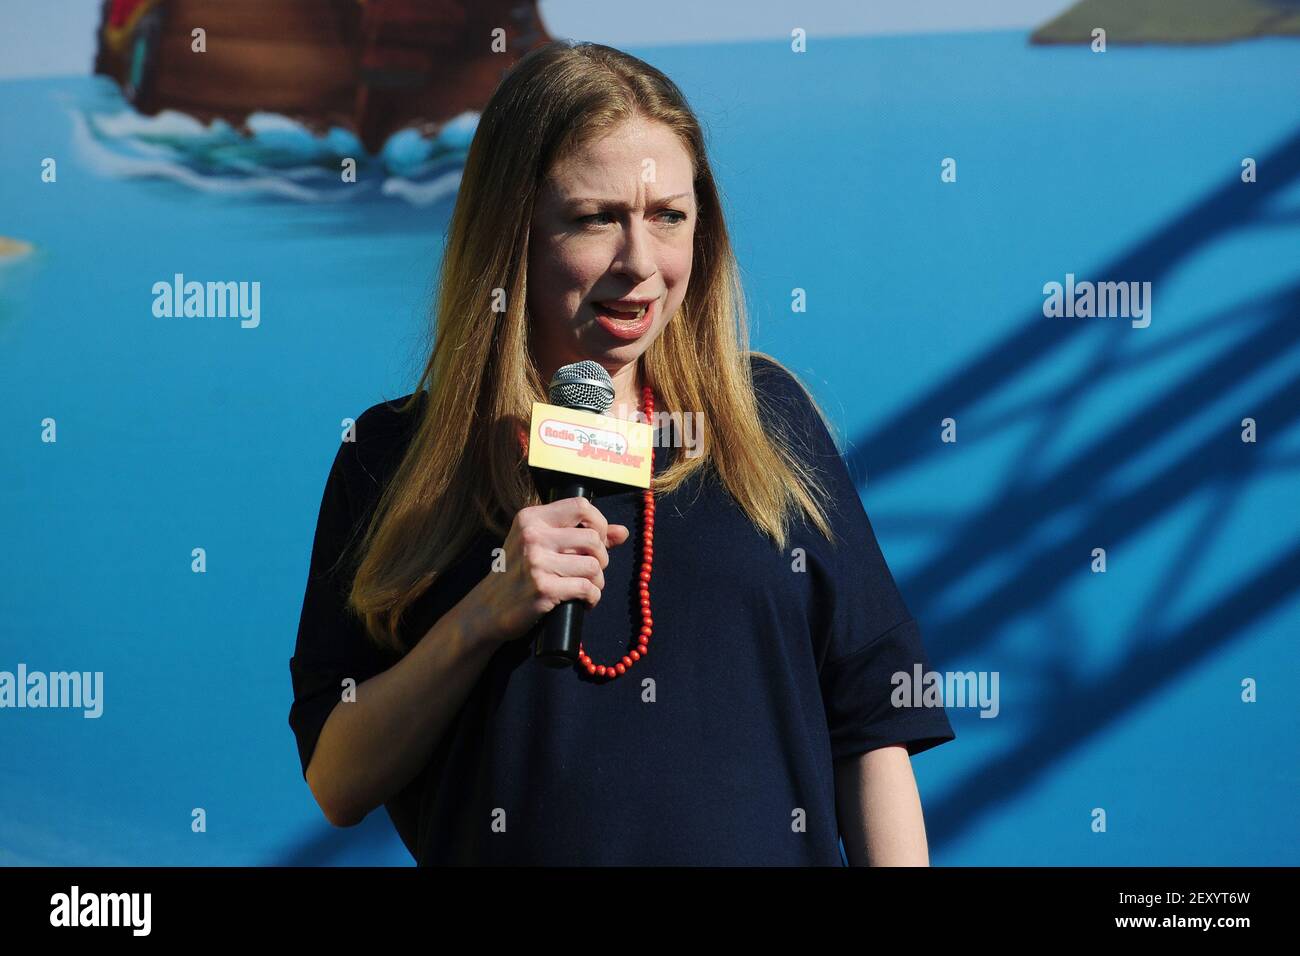 Chelsea Clinton speaks at the Disney Junior's "Pirate and Princess: Power of Doing Good Tour" at Riverbank State Park in New York, NY, during on July 25, 2014 (Photo by Anthony Behar/Sipa USA) Stock Photo